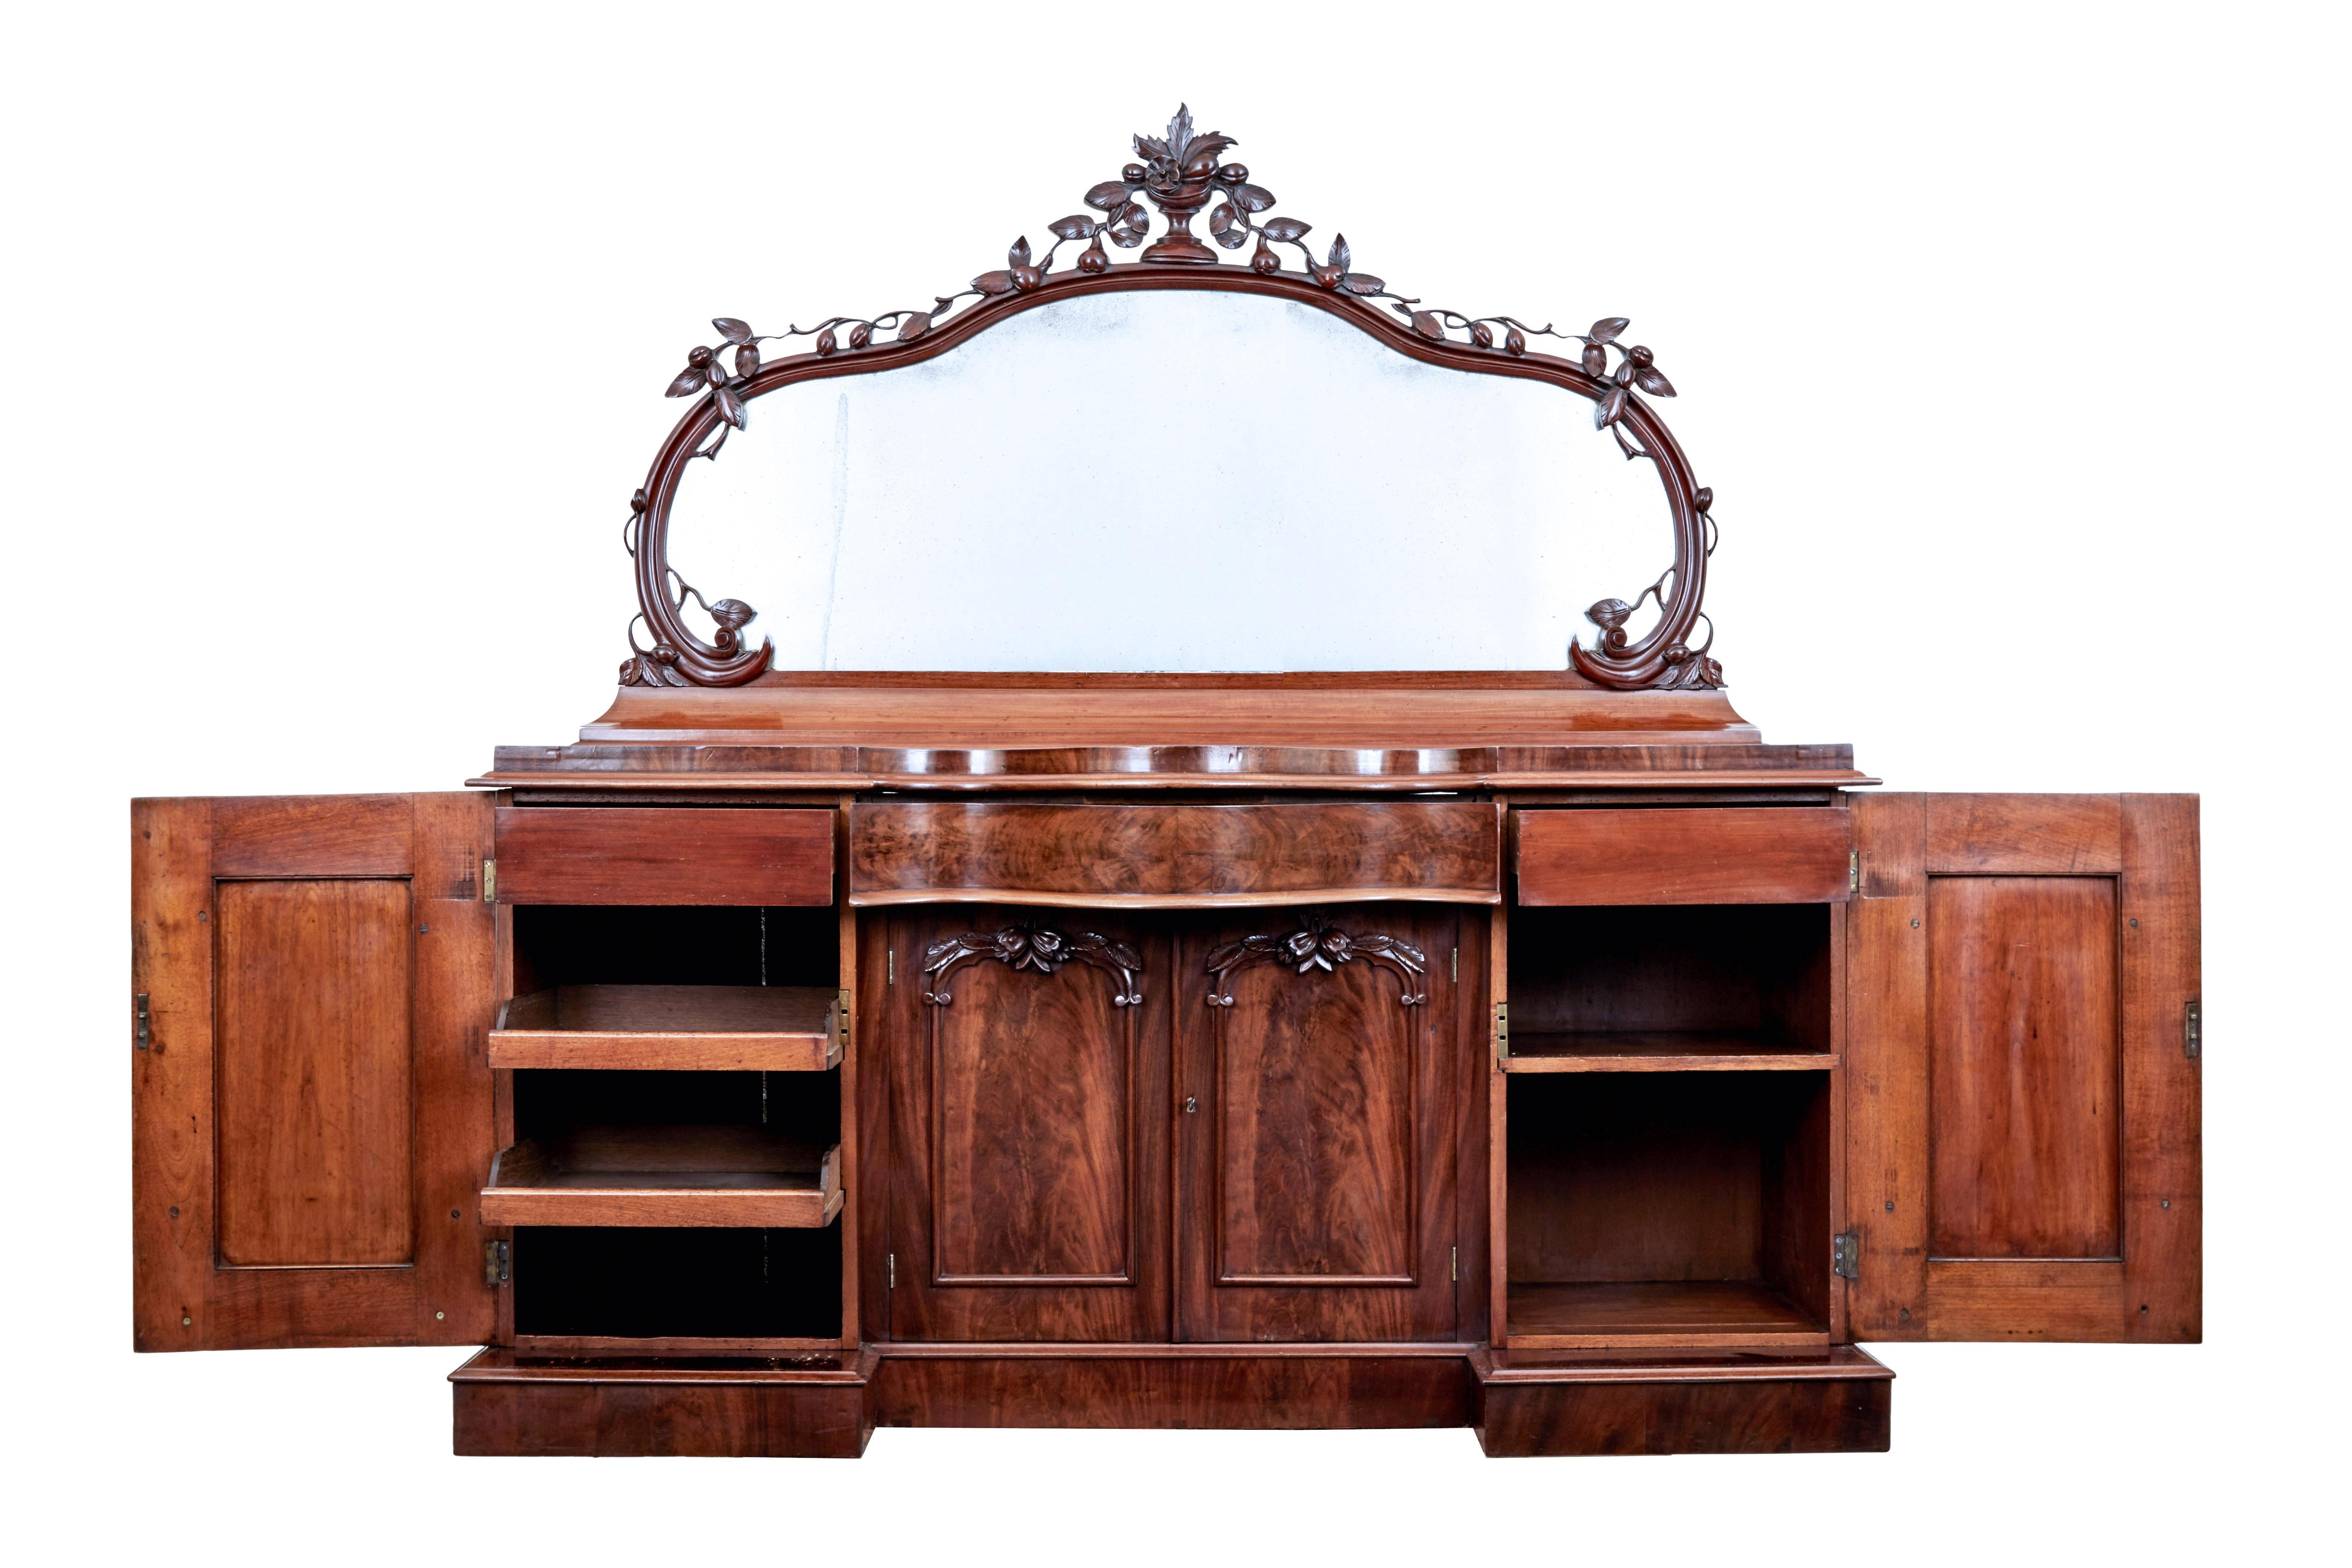 High Victorian shaped flame mahogany mirror topped sideboard, circa 1860.

Fine quality 2 part sideboard. Shaped mirror with original plate, carved cup at the top with flowing leaves and fruit flowing down to the scrolled base of the